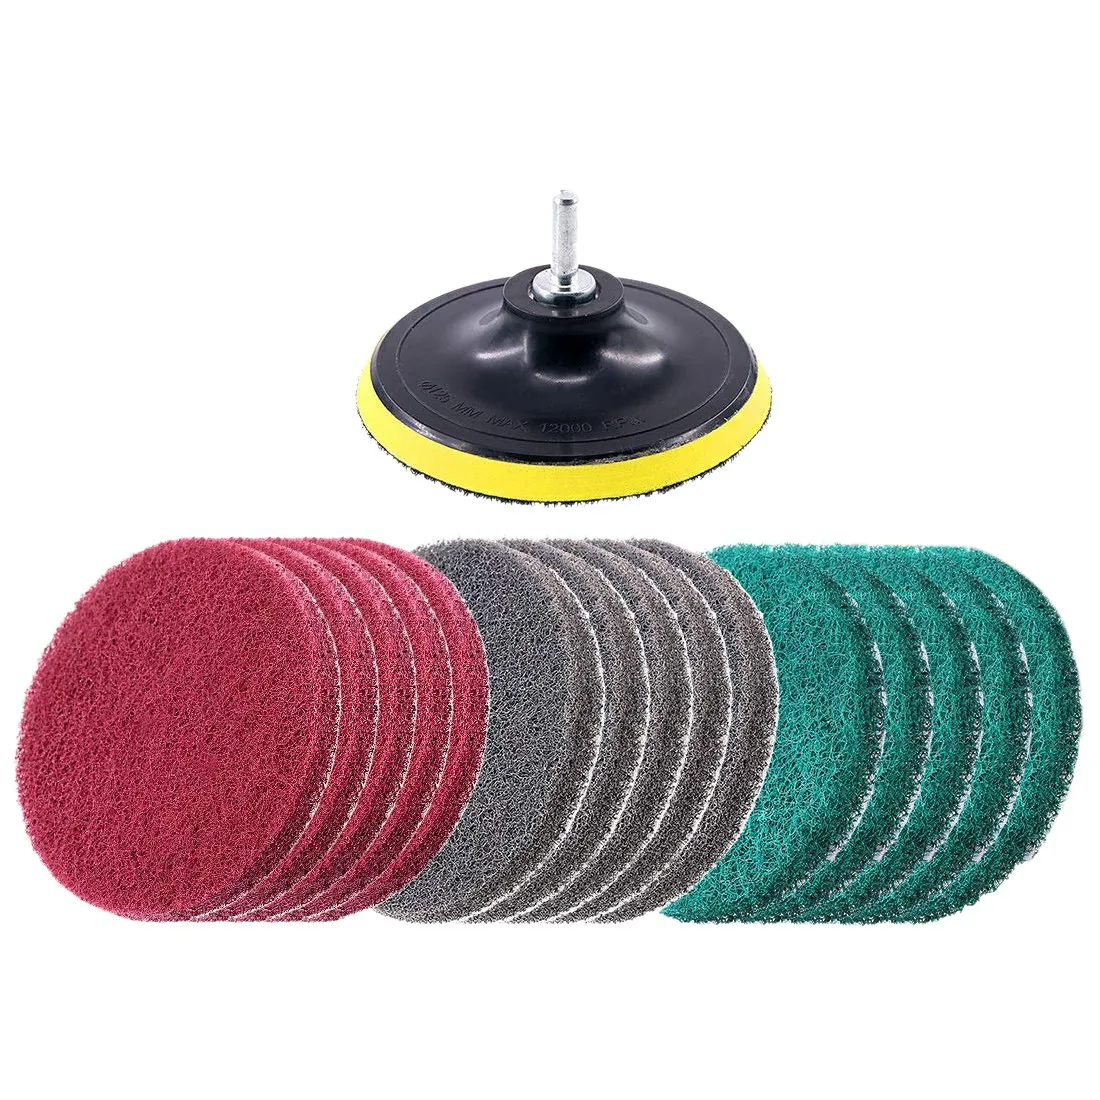 

16Pcs 5Inch 3 Different Color Scrubbing Pads Drill Powered Brush Tile Scrubber Scouring Pads Cleaning Kit,Abrasive Buffing Pads